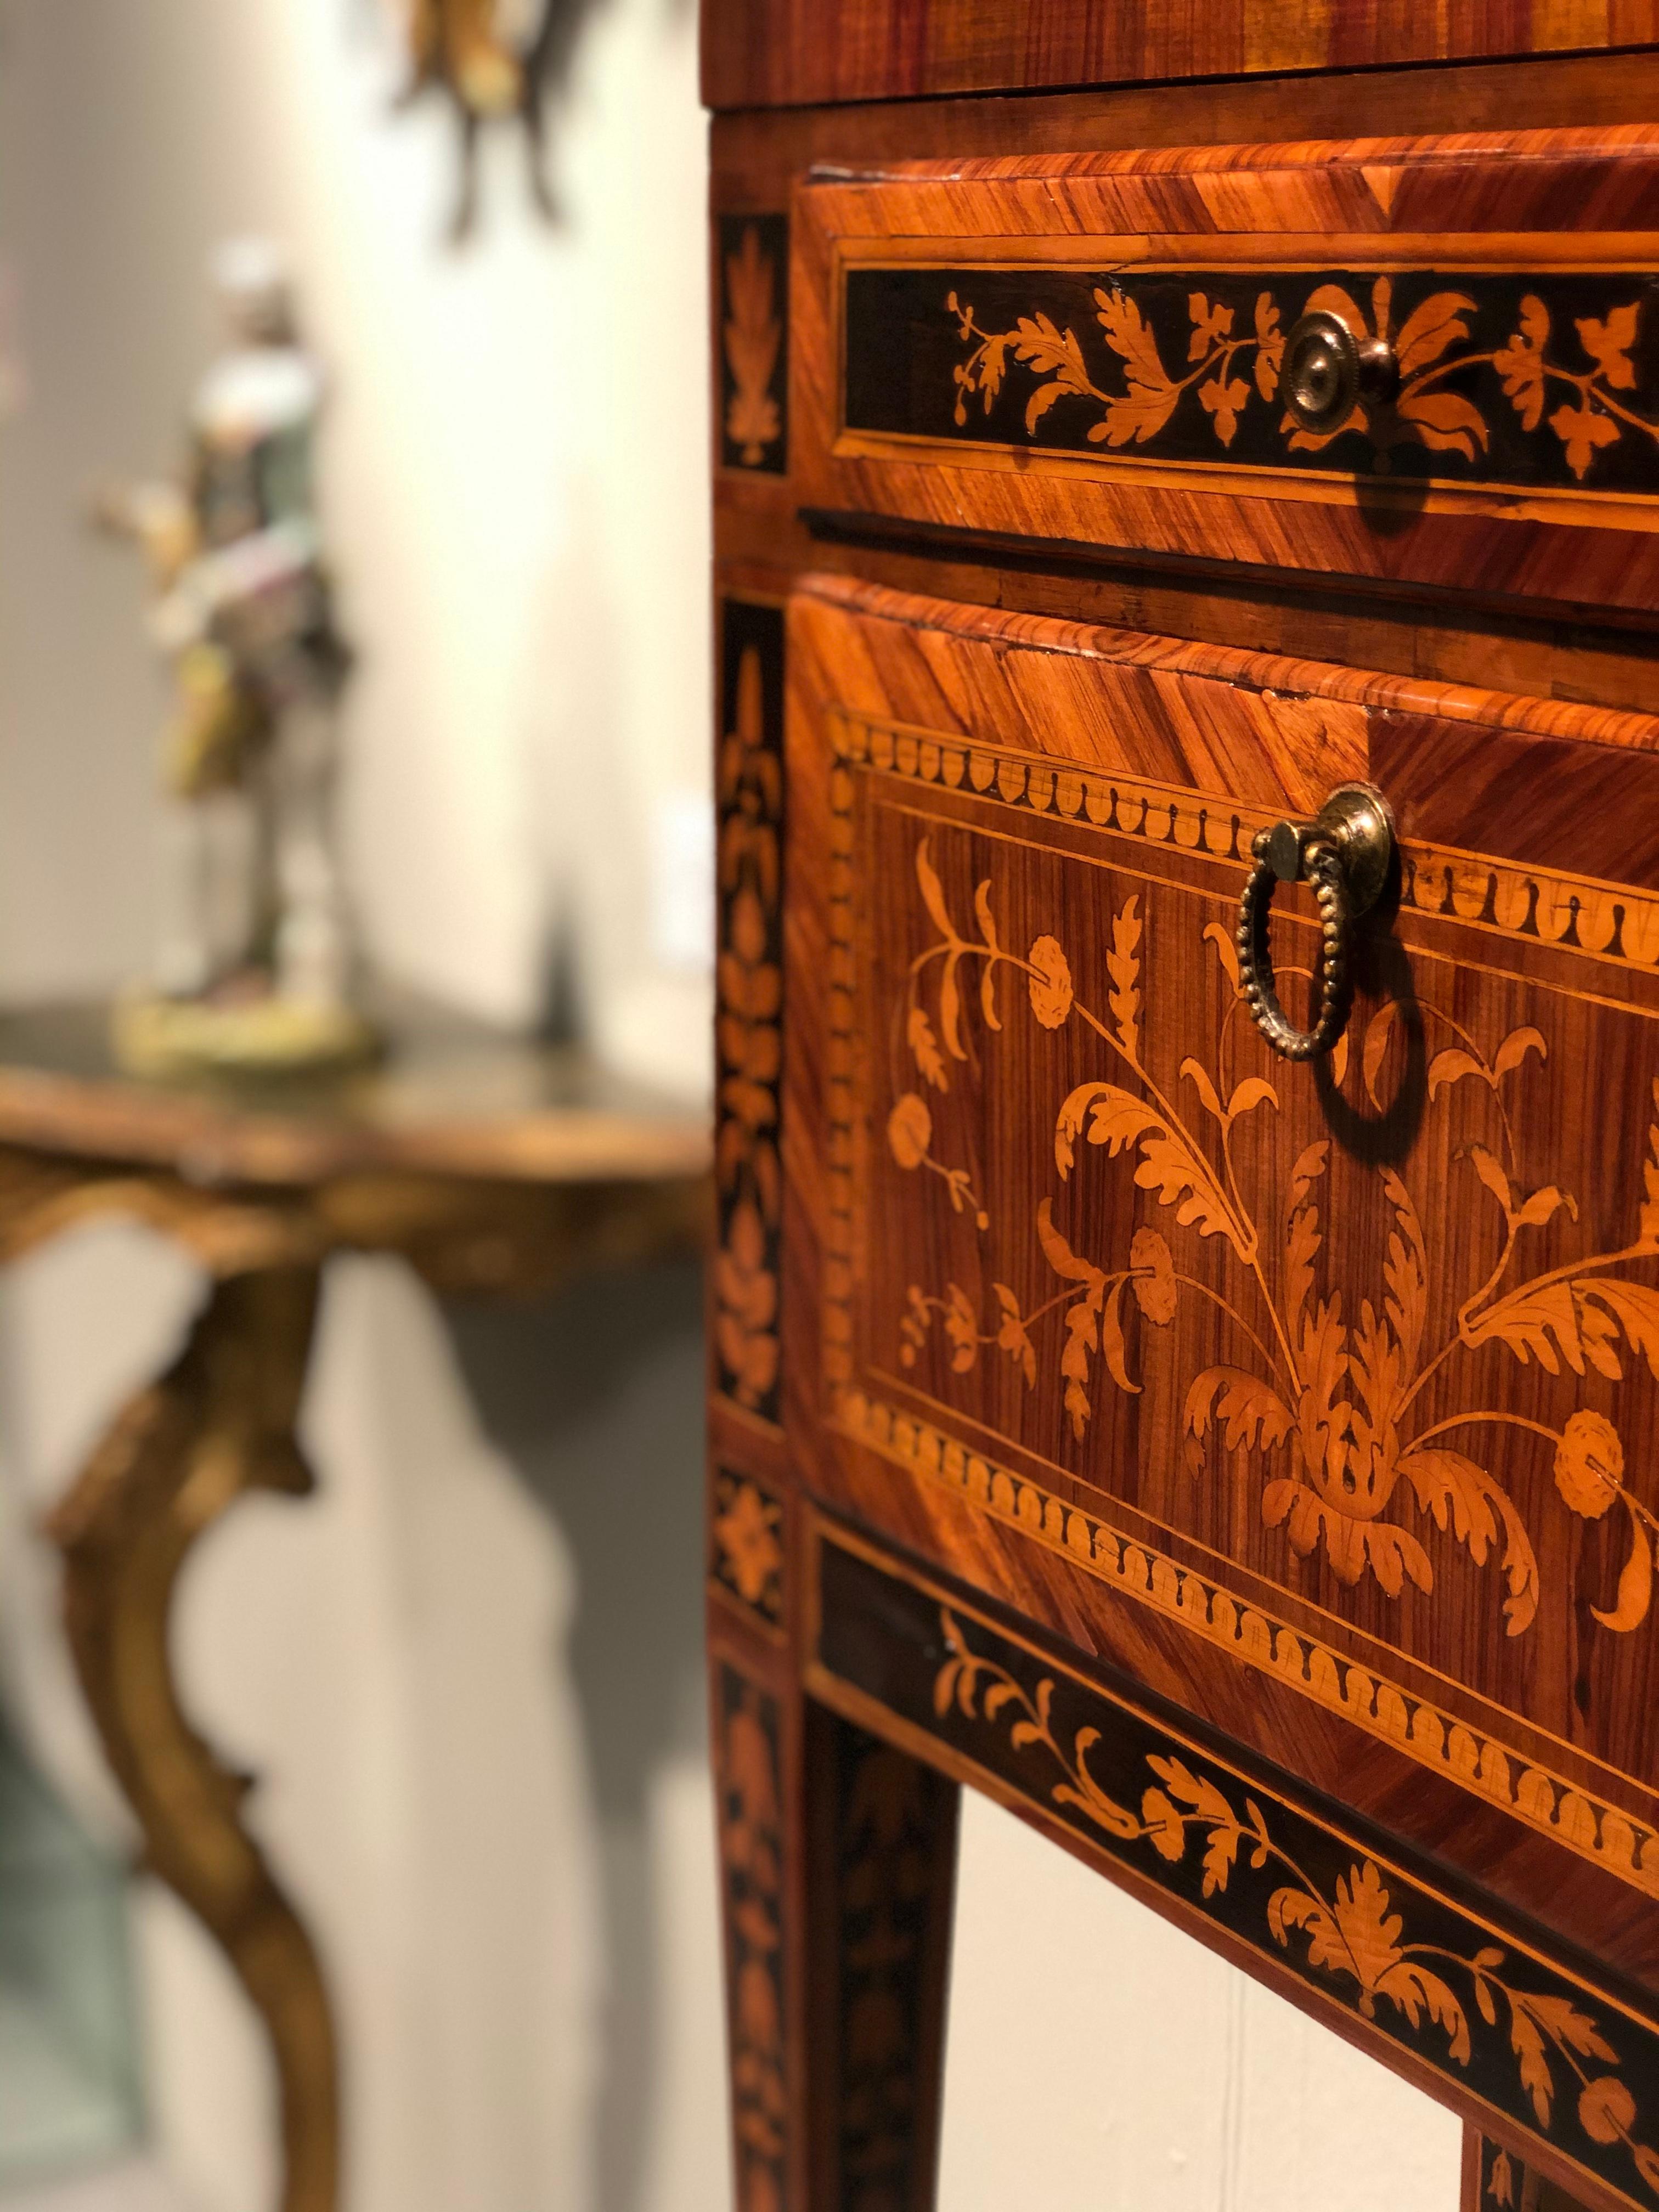 This refined bedside table/small sideboard was made in Lombardy (Italy) in the neoclassical period, towards the end of the 18th century.
The wooden structure is veneered and decorated with inlays in various essences.
The front of the neoclassical